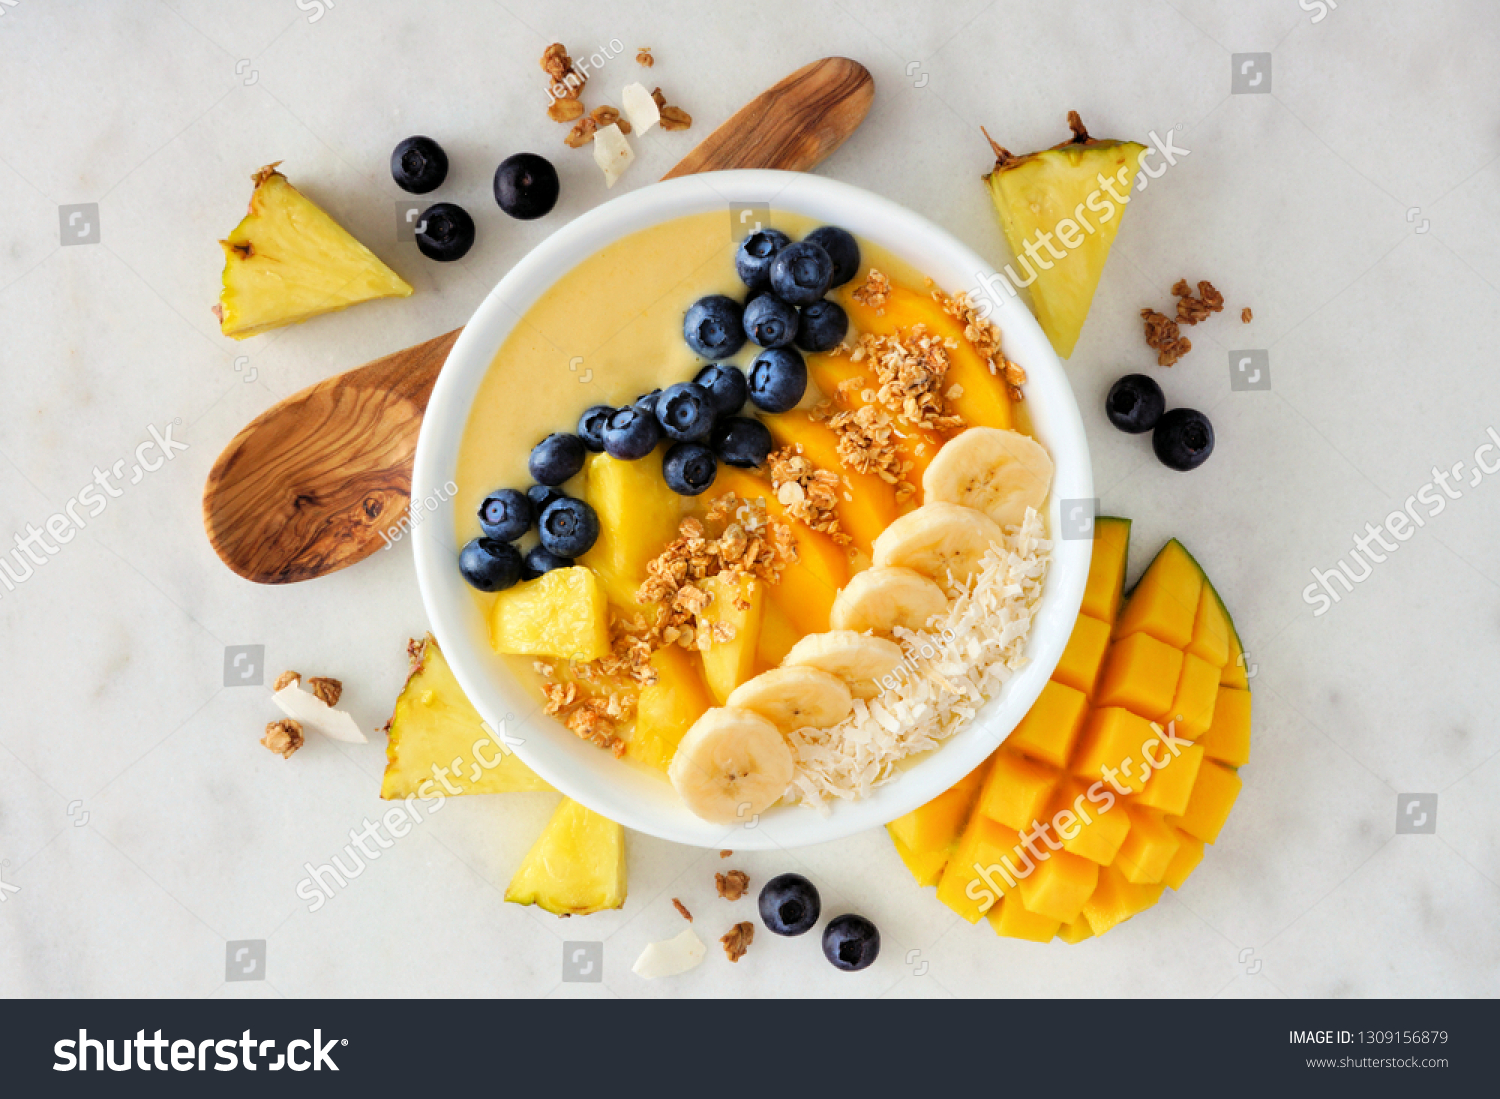 Healthy pineapple, mango smoothie bowl with coconut, bananas, blueberries and granola. Above view scene on a bright background. #1309156879